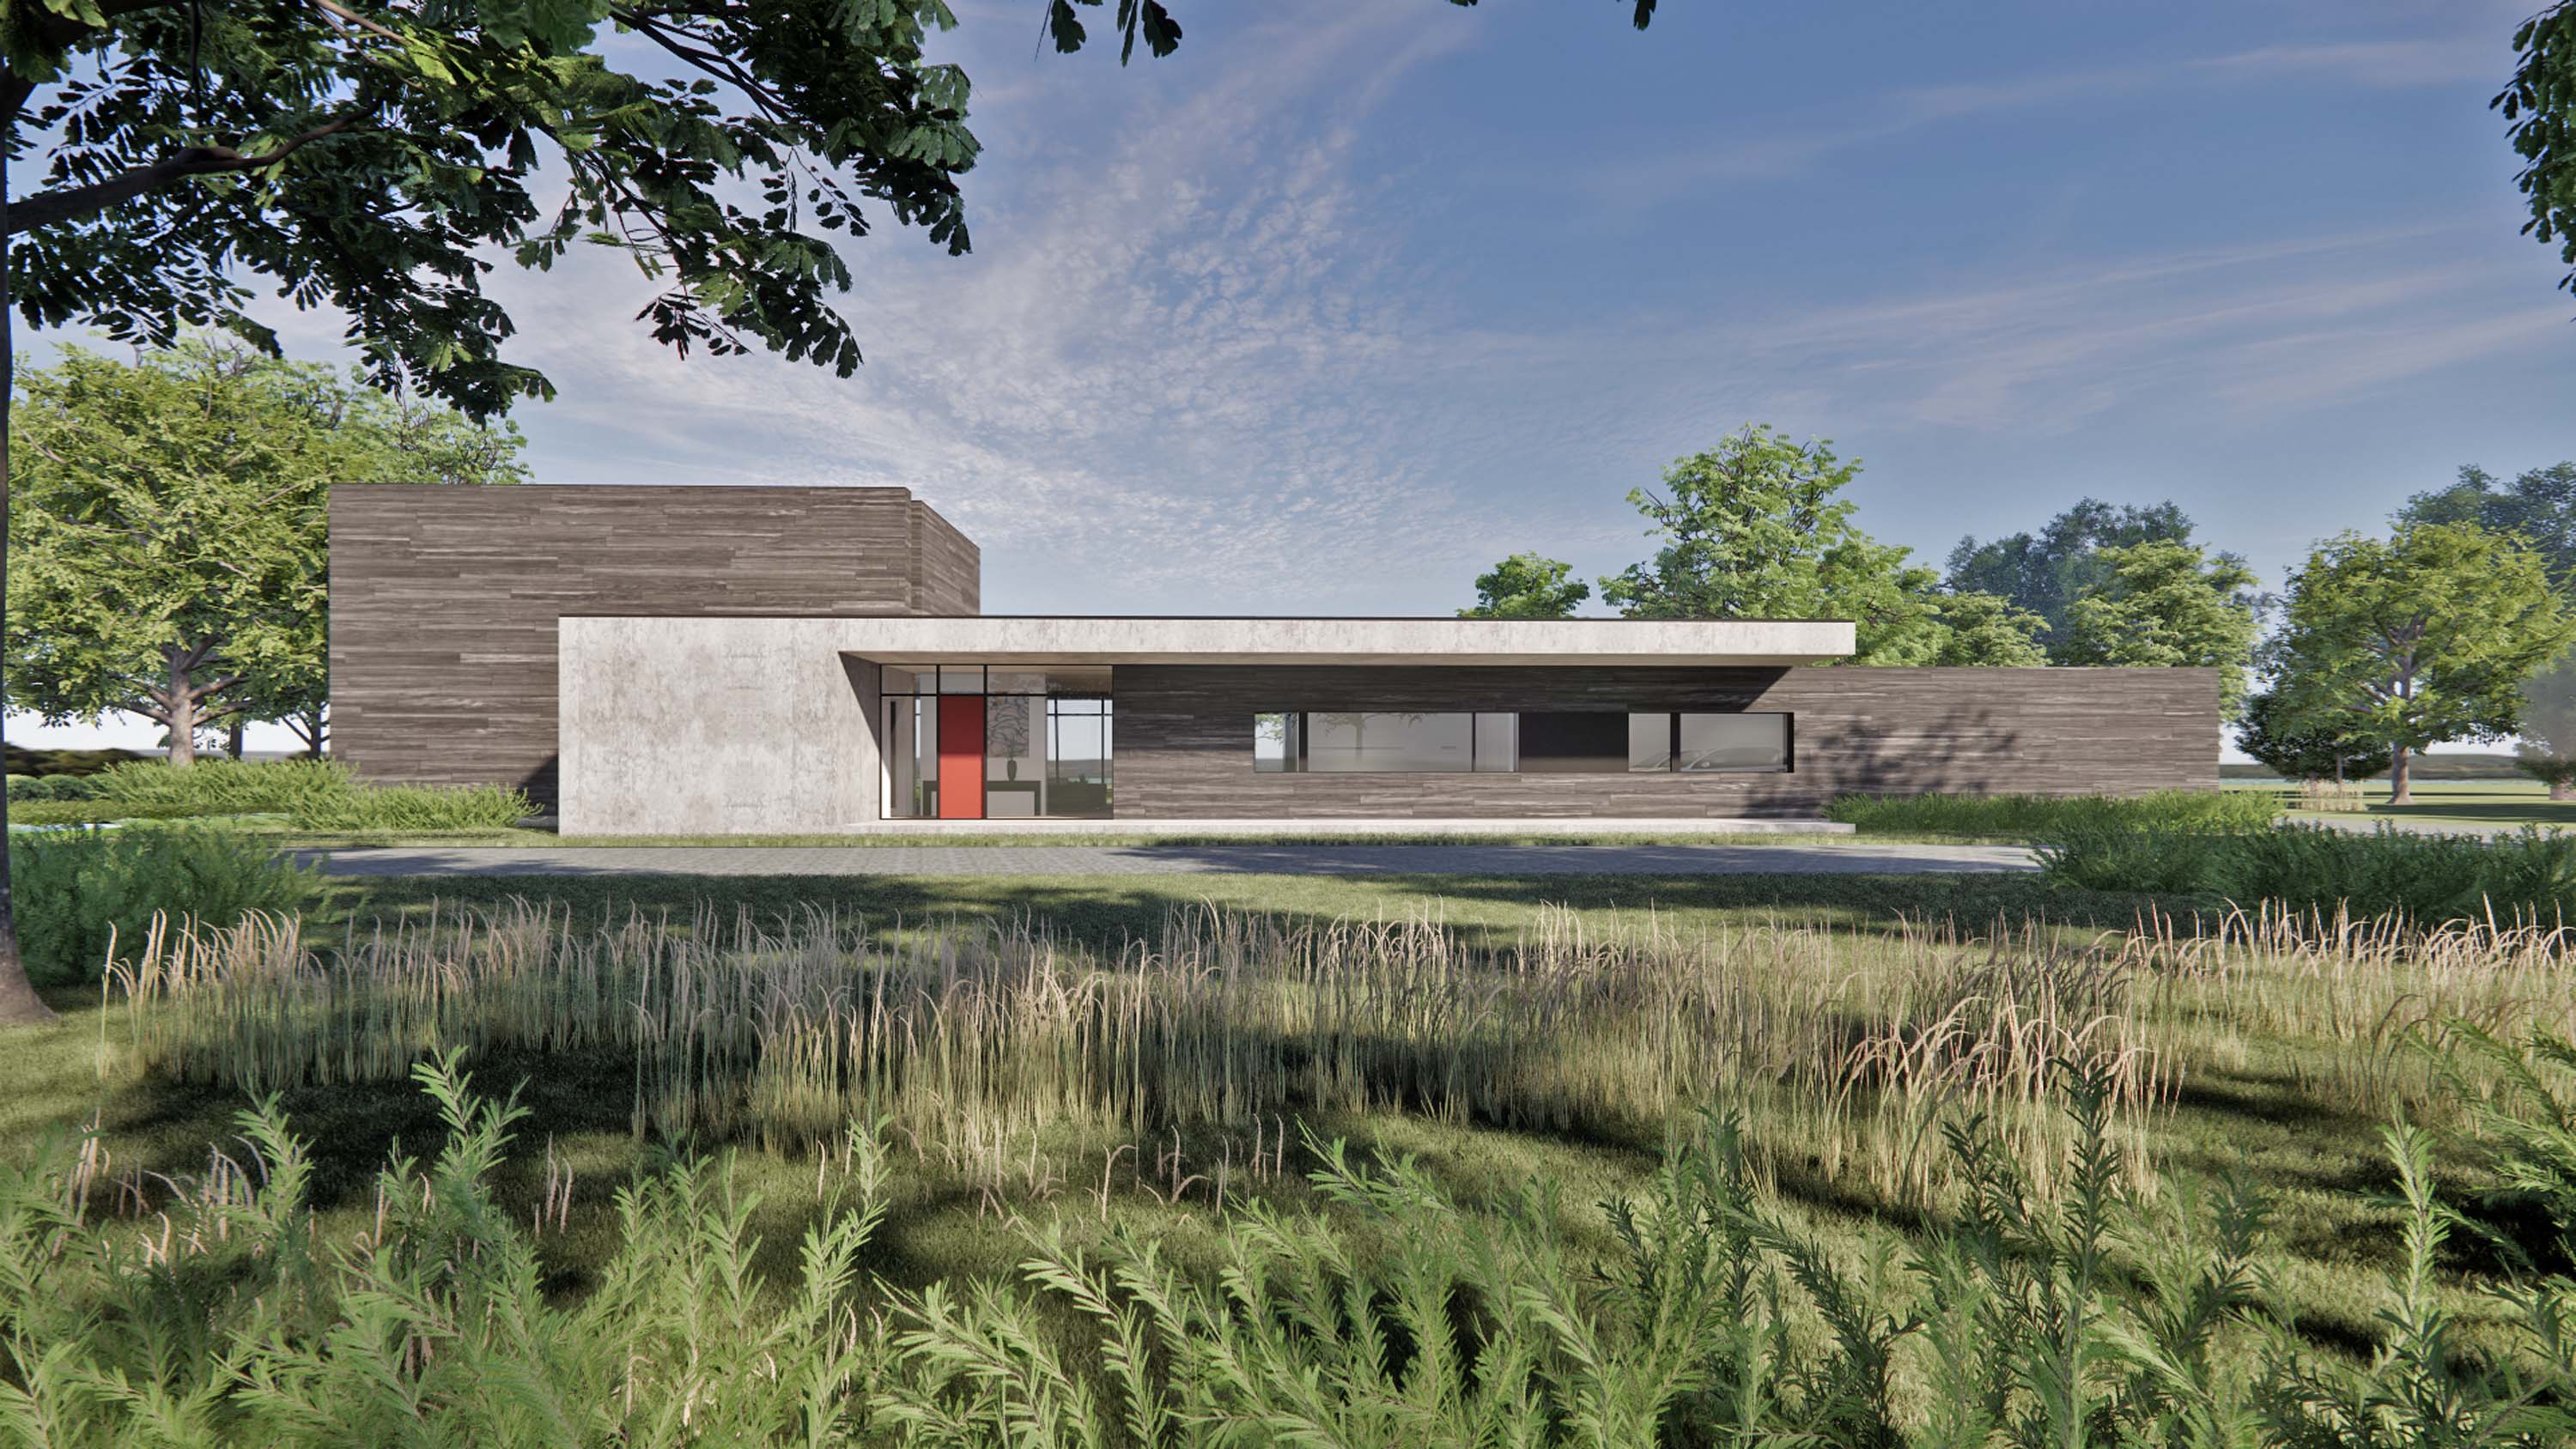 Street view exterior rendering of Log Tavern Pond House by Specht Novak Architects.